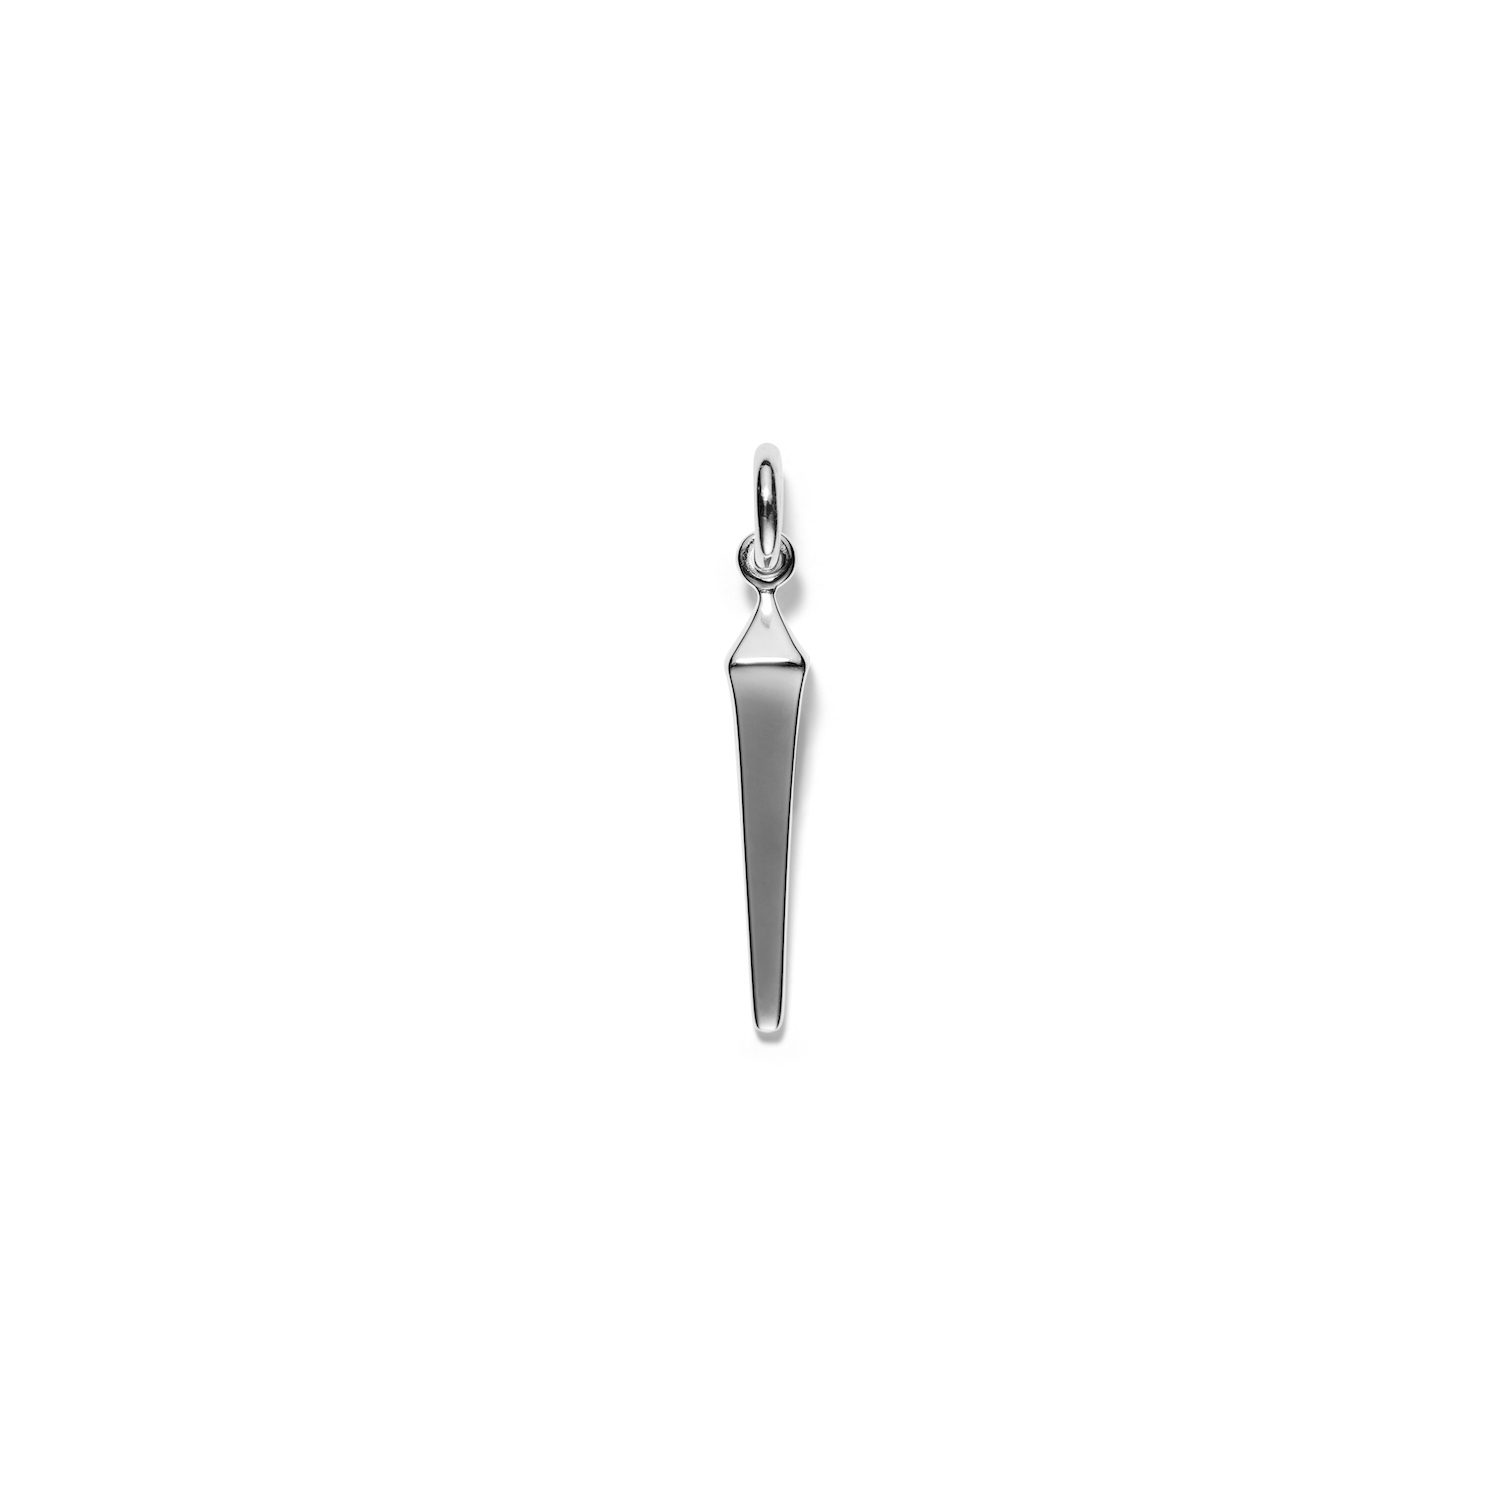 Miss Pevery one high polished sterling silver pendant